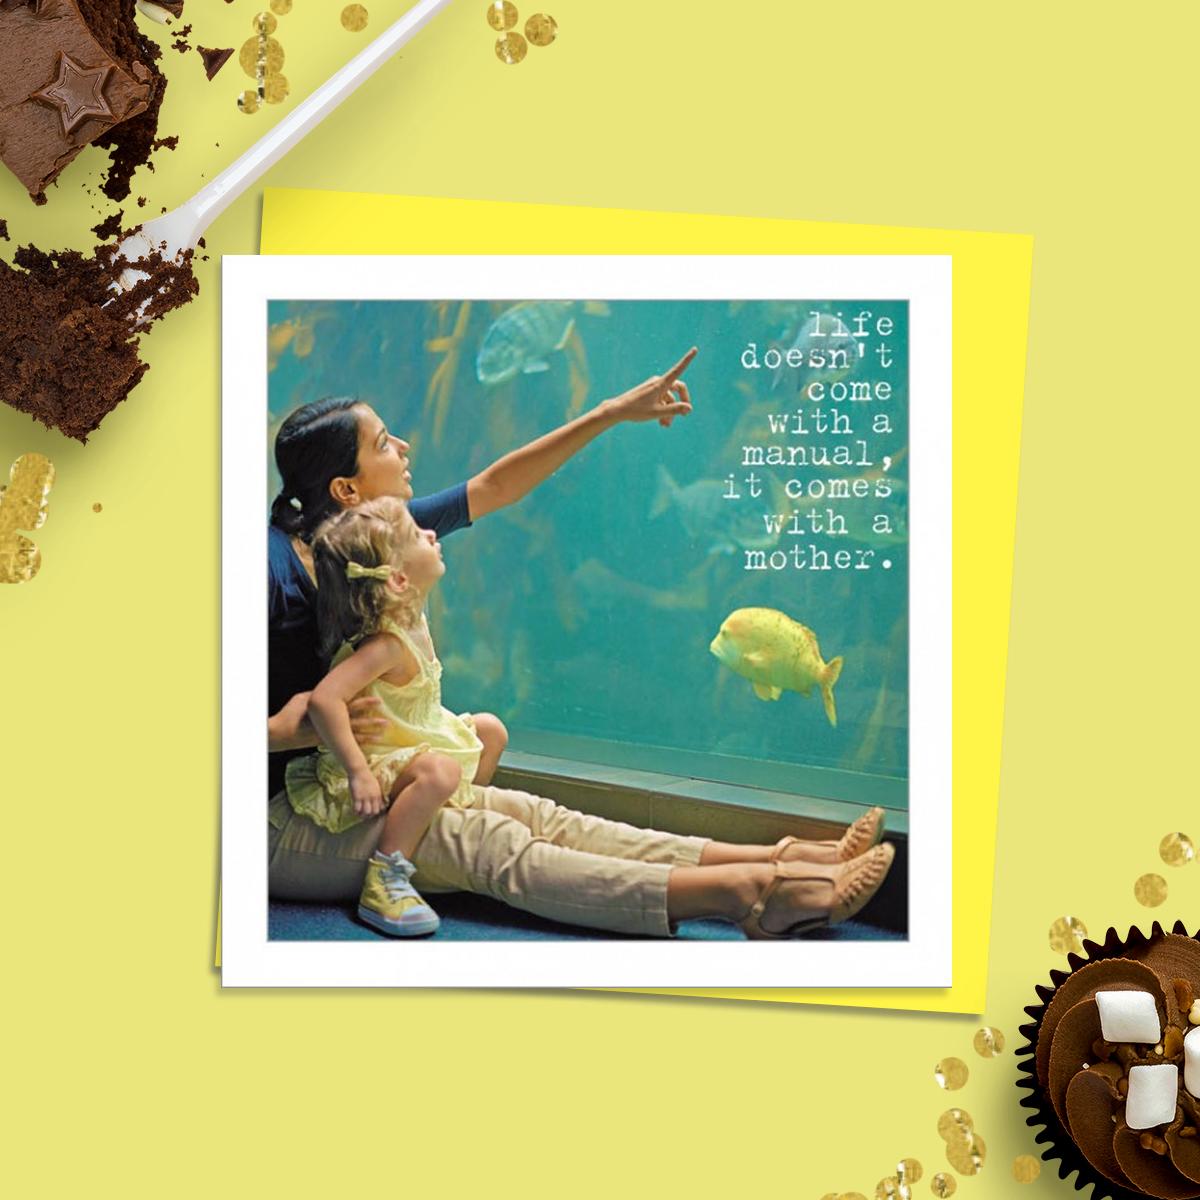 Beautiful Photographic Funny Card Showing A Young Girl With Mother Pointing Into An Aquarium At The Fish. Caption: Life Doesn't Come With a Manual, It Comes with A Mother. Message Inside: With Love. Complete With Neon Yellow  Envelope